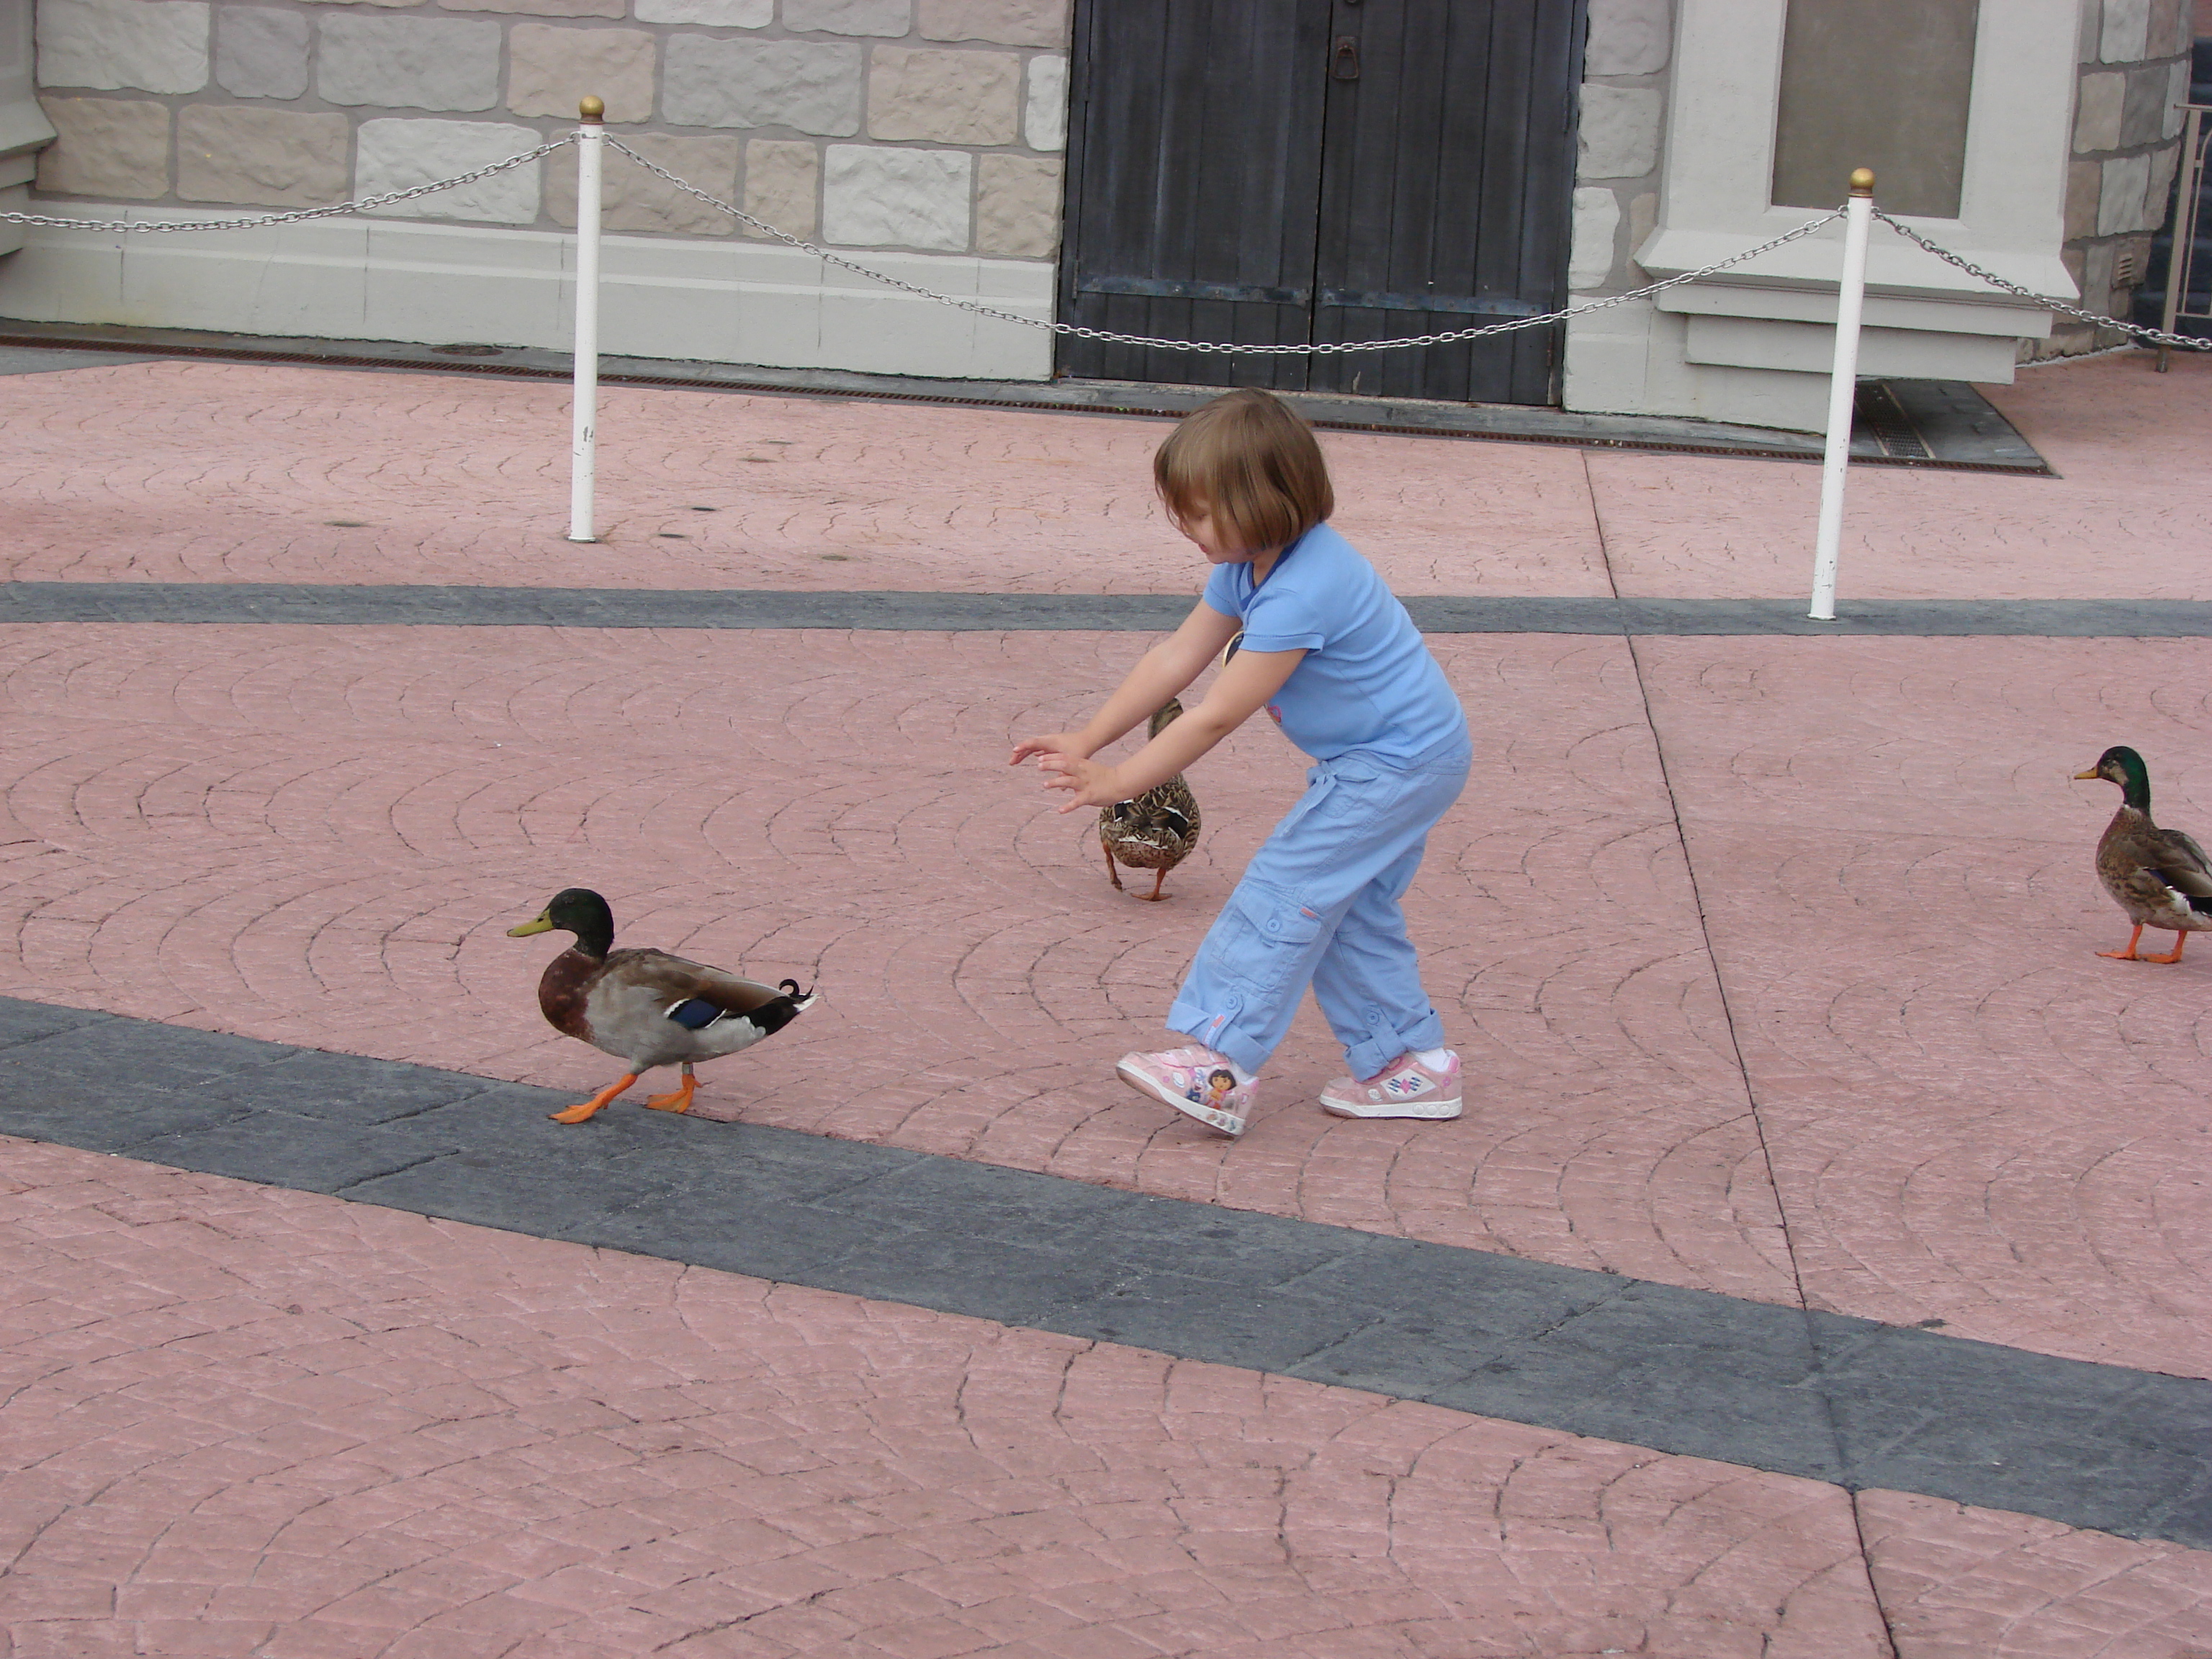 Wild duck chase in the Magic Kingdom!